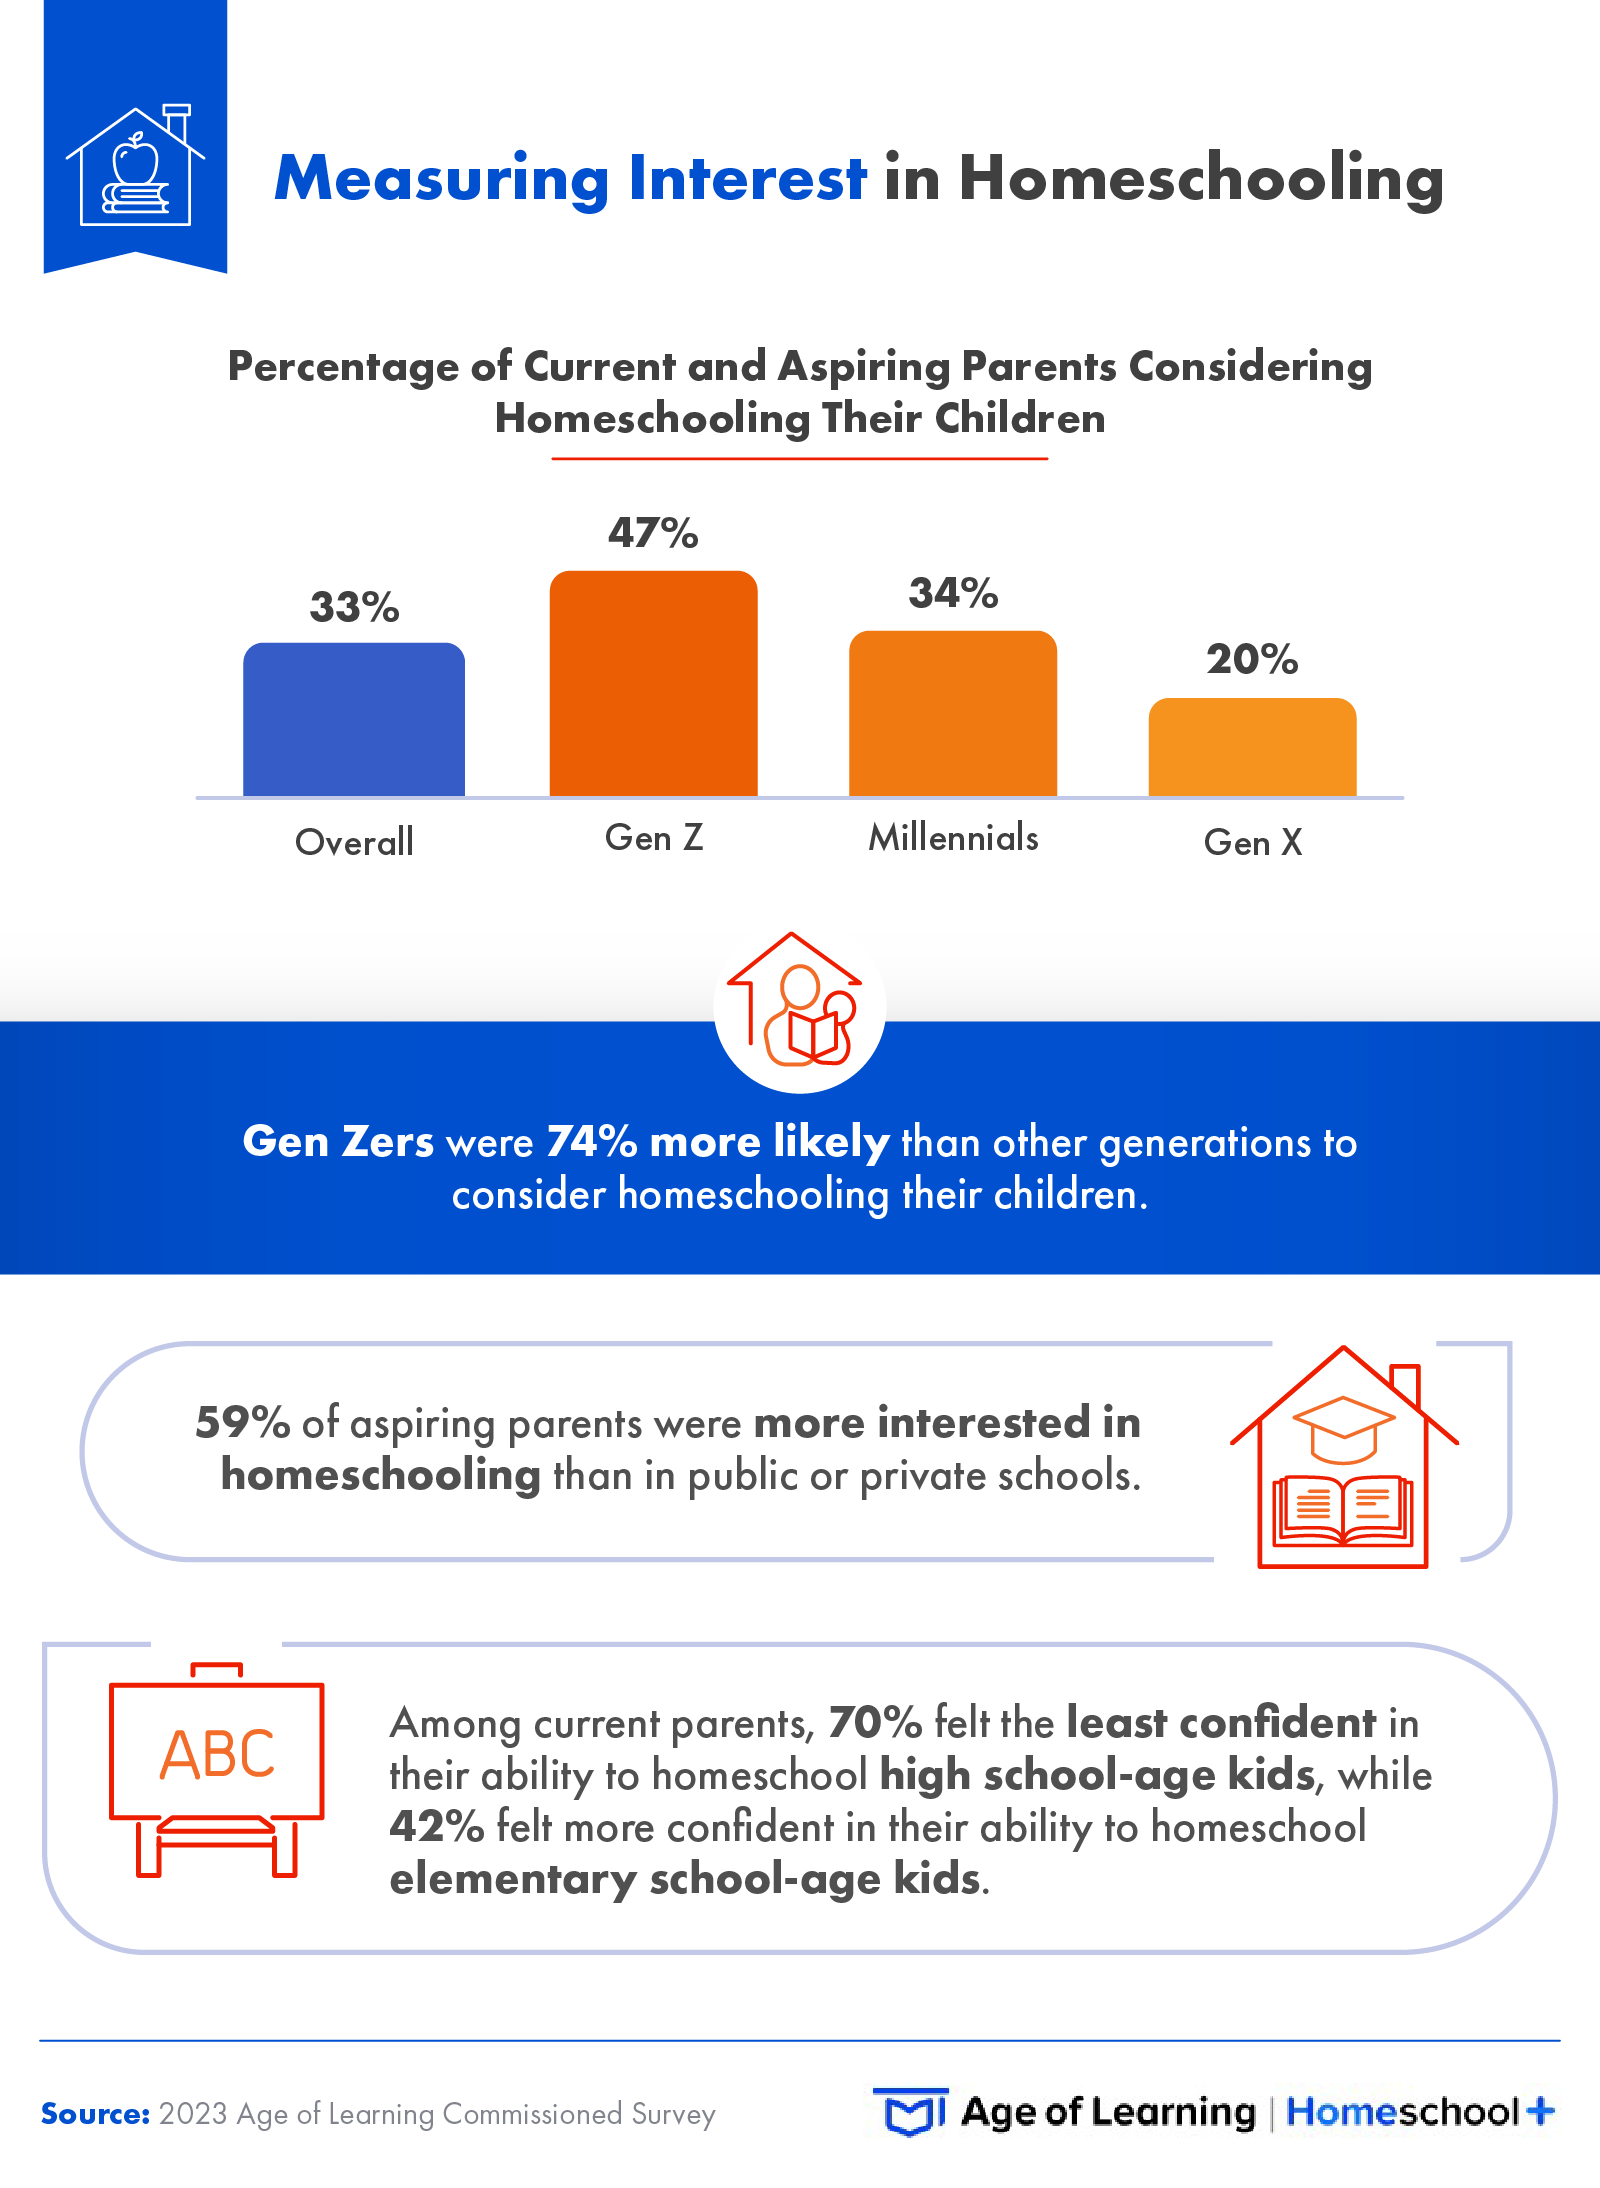 This infographic explores the interest in homeschooling.